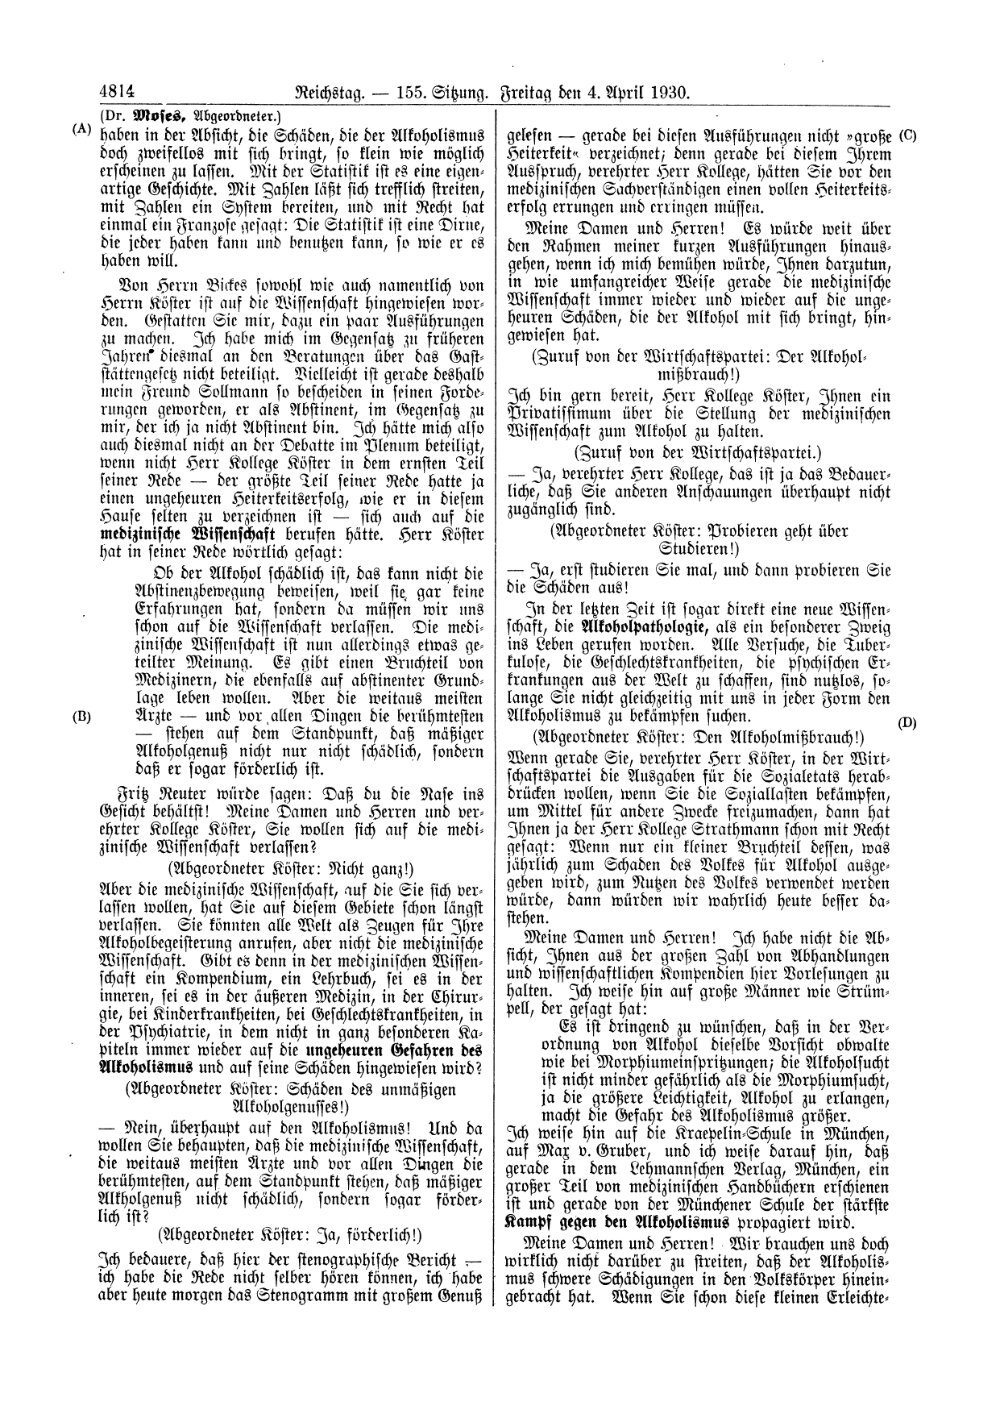 Scan of page 4814